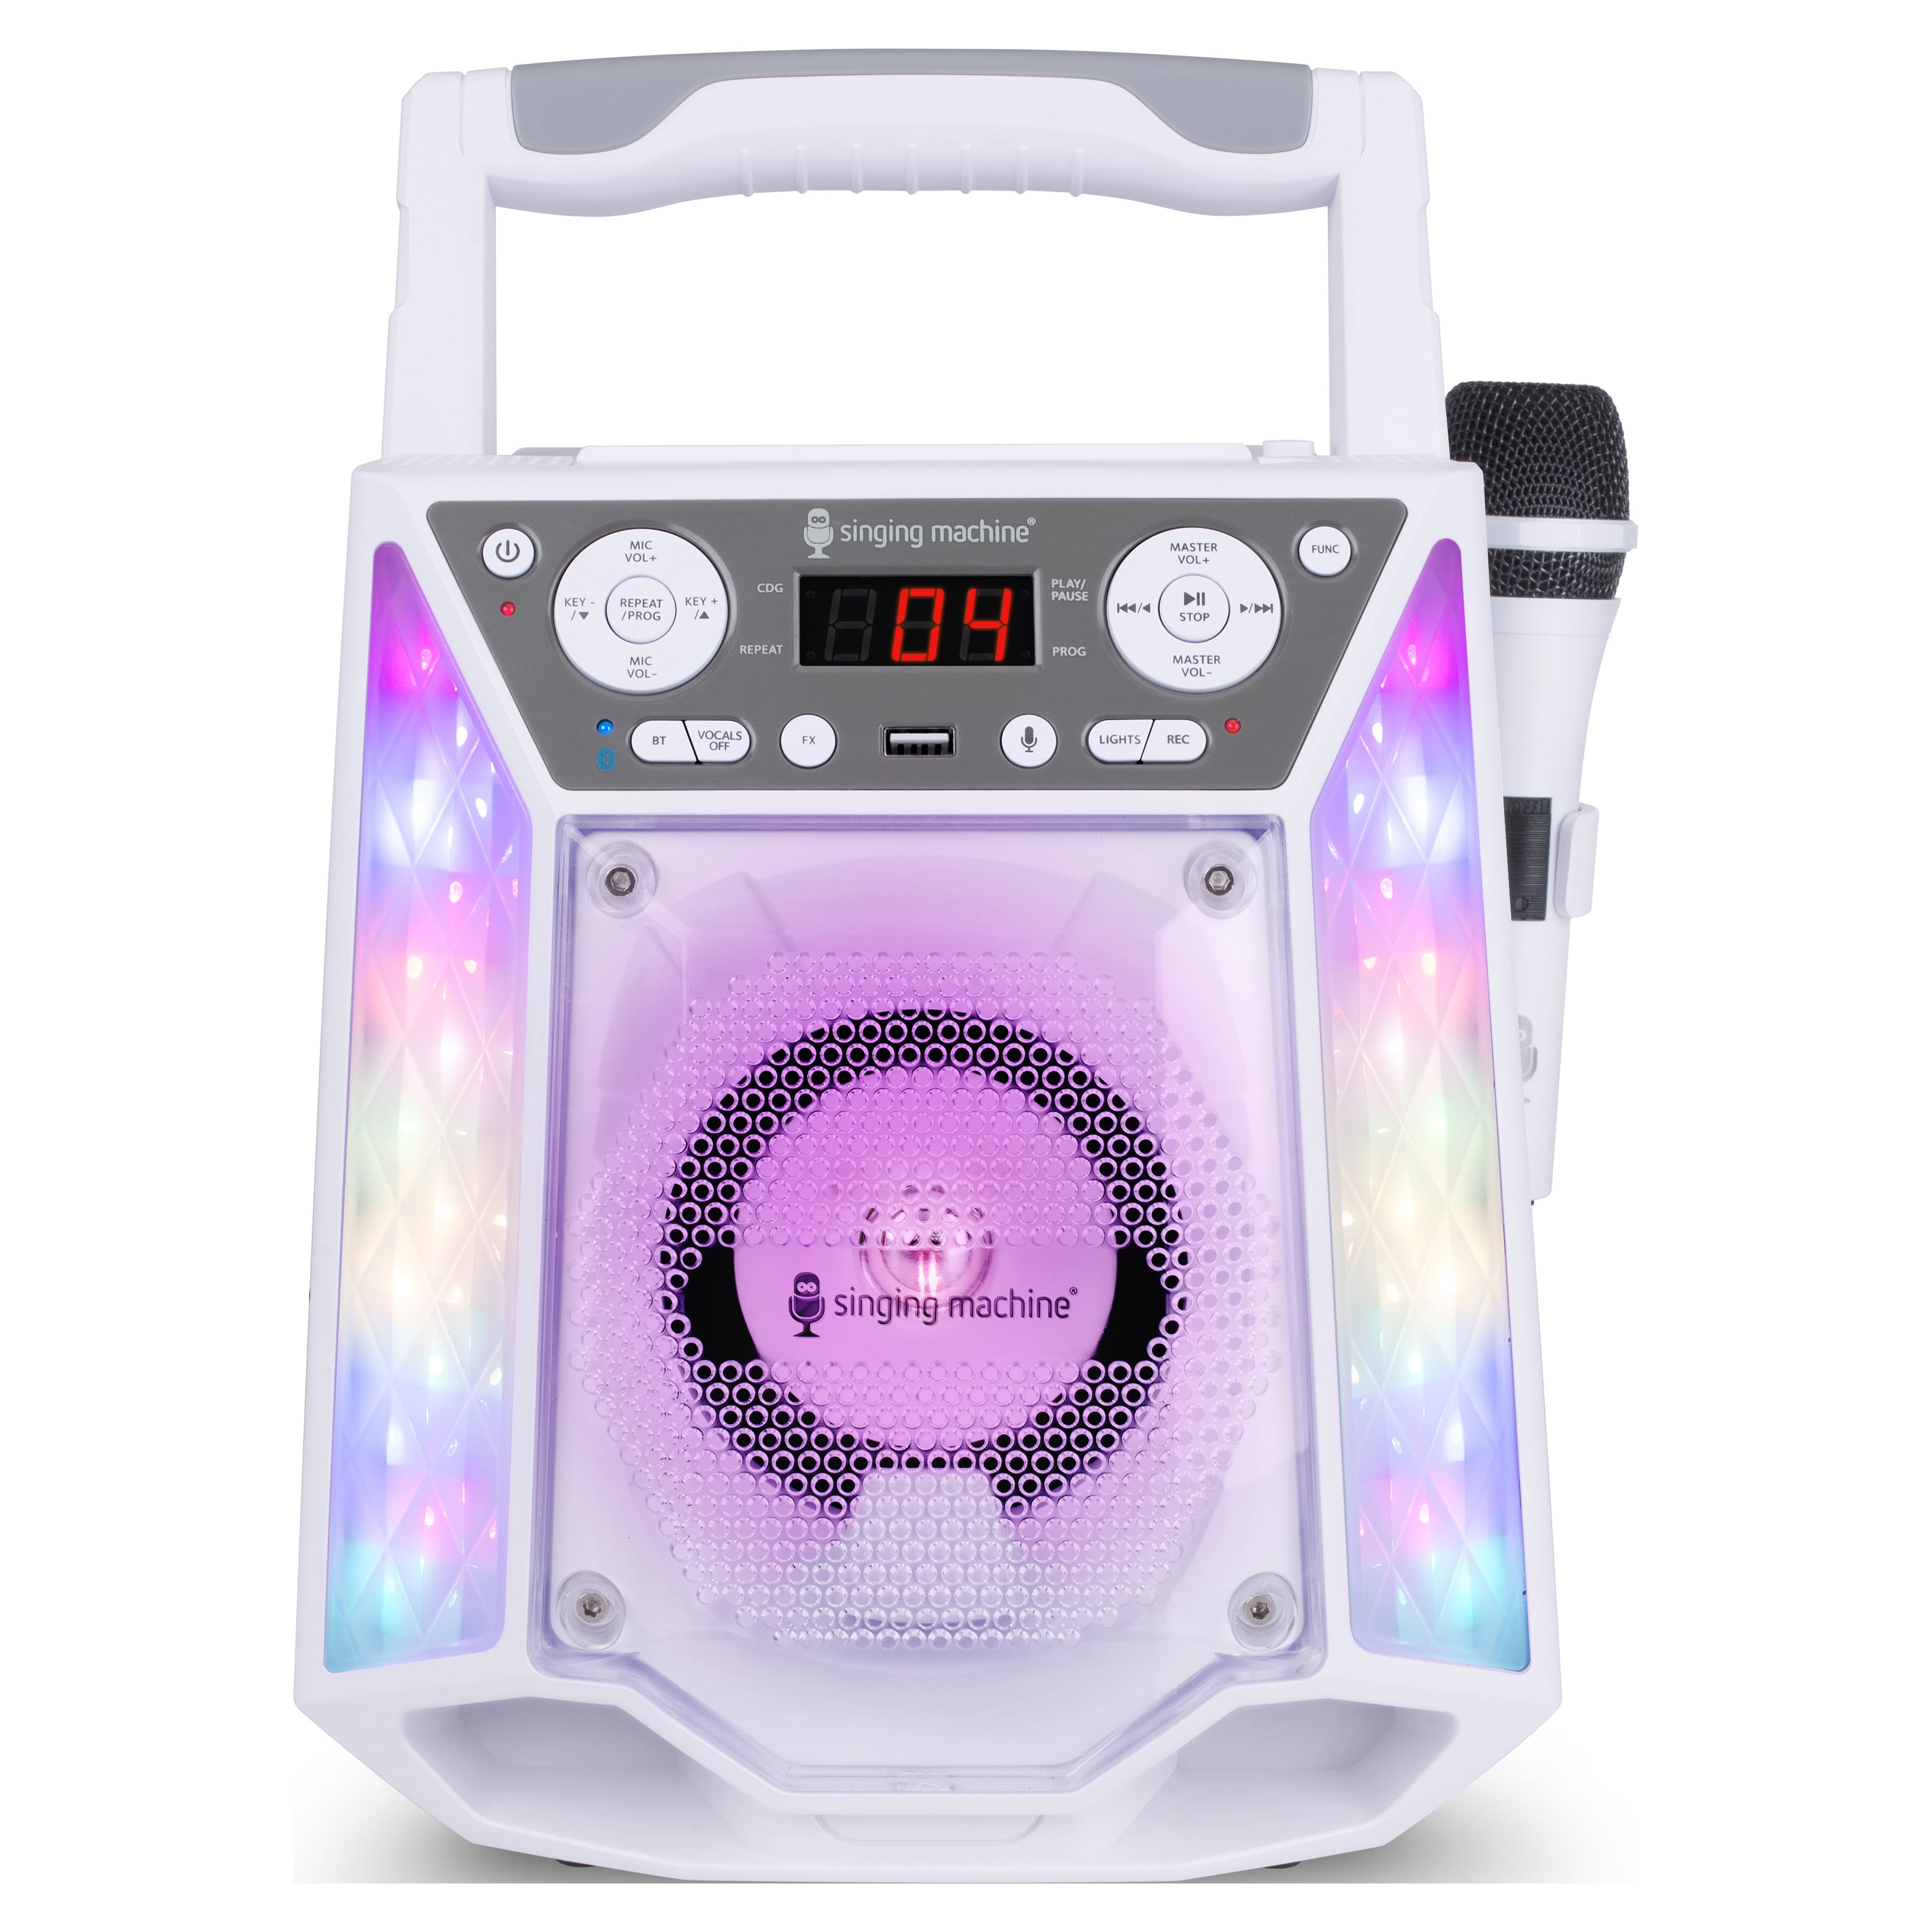 The Singing Machine Shine Voice SML2350 Karaoke Machine with Voice Assistant - image 2 of 7